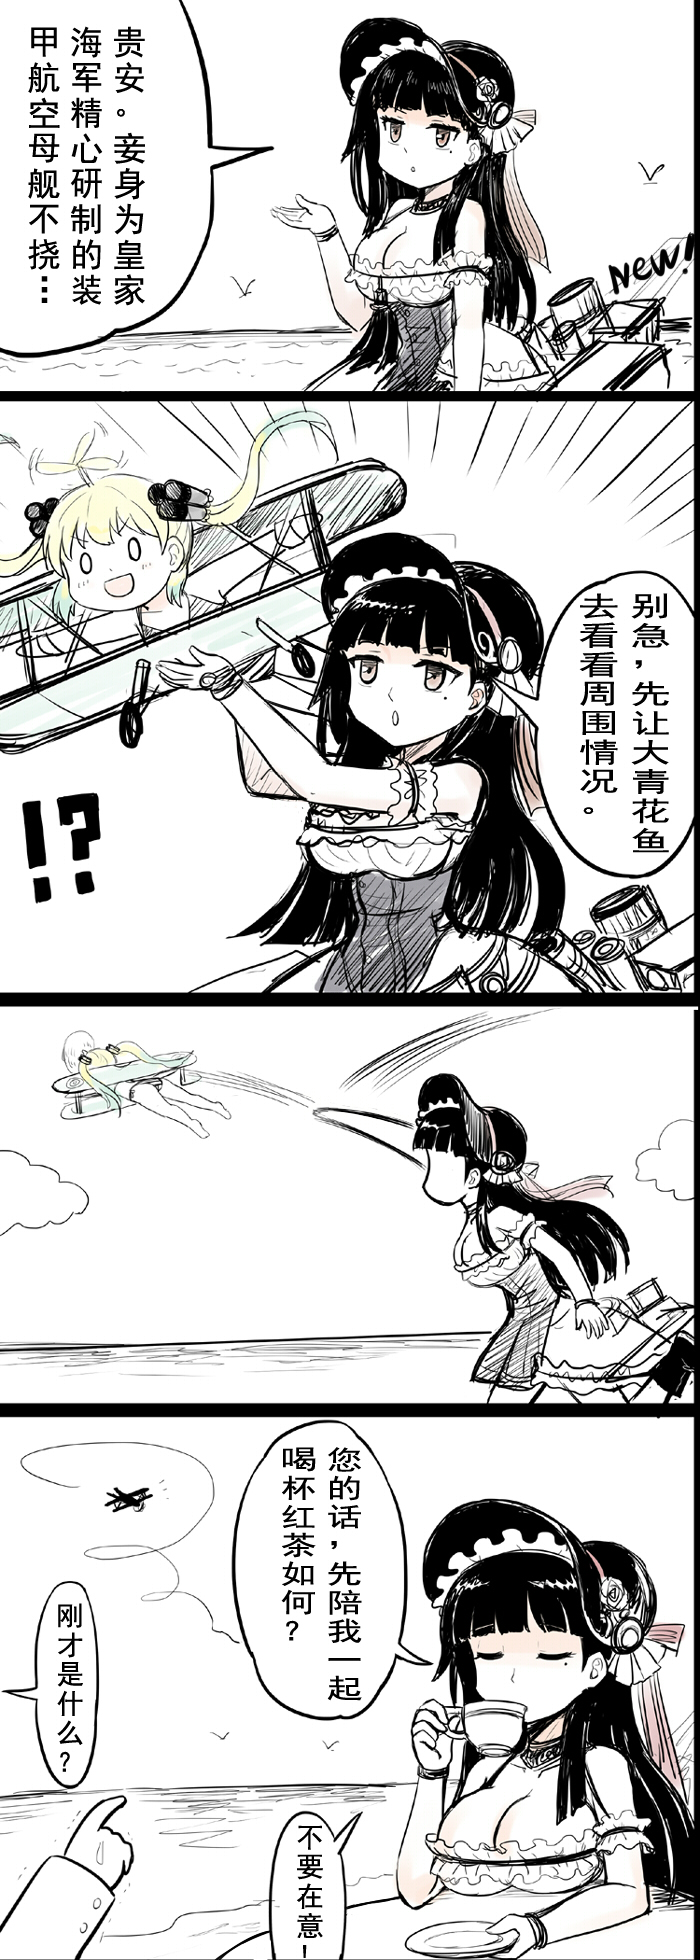 2girls aircraft airplane albacore_(zhan_jian_shao_nyu) biplane black_hair blonde_hair chinese comic cup hat highres holding holding_cup indomitable_(zhan_jian_shao_nyu) multiple_girls namesake teacup throwing translation_request twintails y.ssanoha zhan_jian_shao_nyu